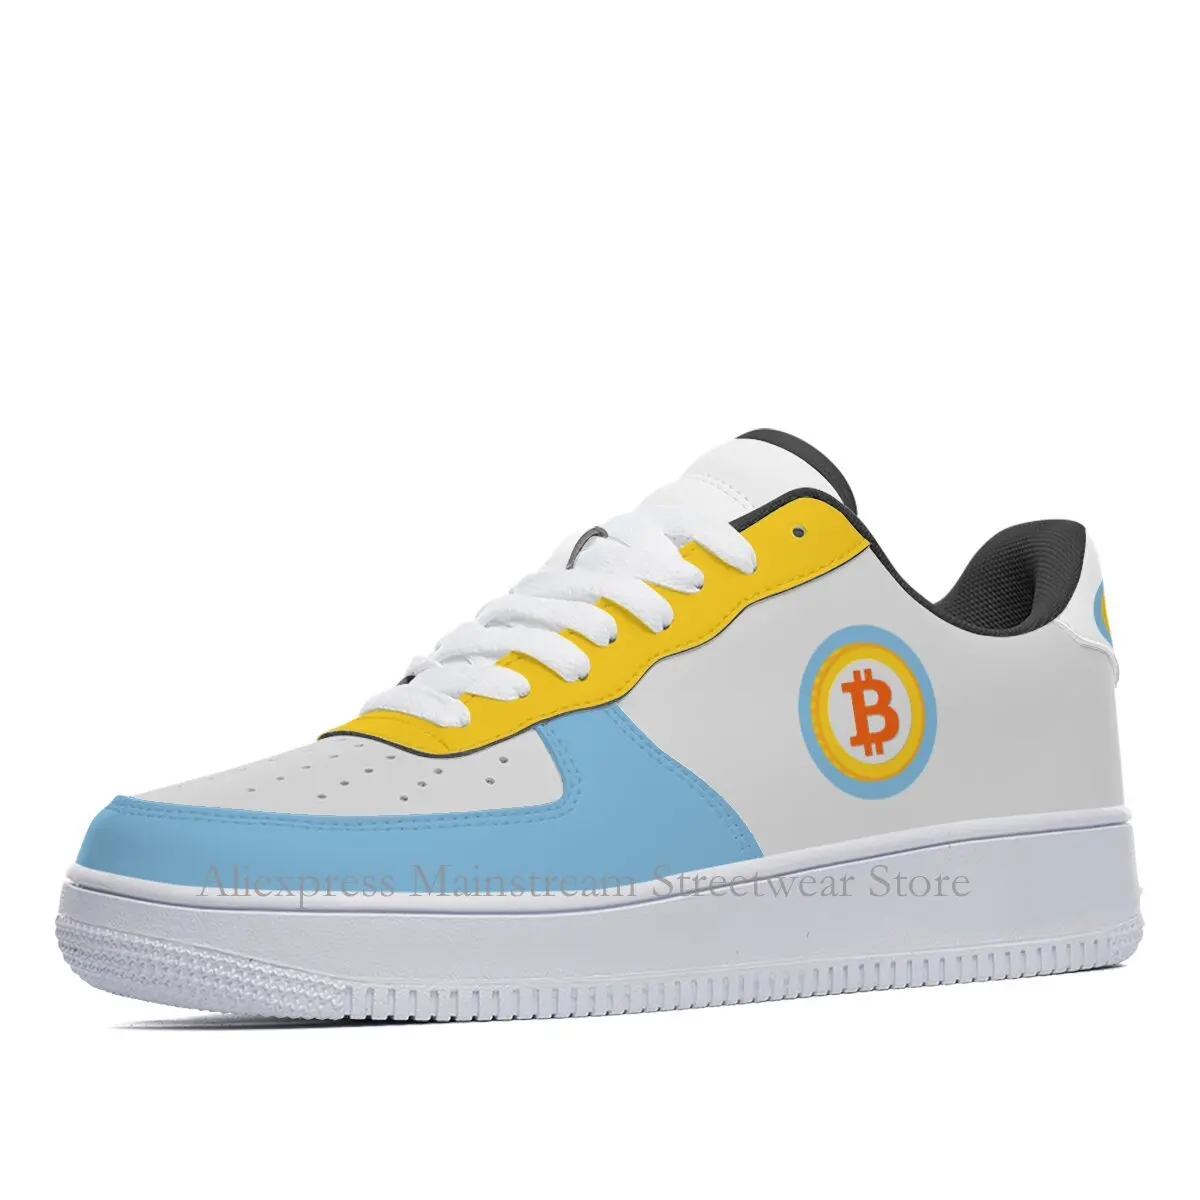 

BTC shoes sneakers Cryptocurrency Crypto Miner Bitcoin Crypto Design Blockchain shoe Skate shoe Skate Personalized customization